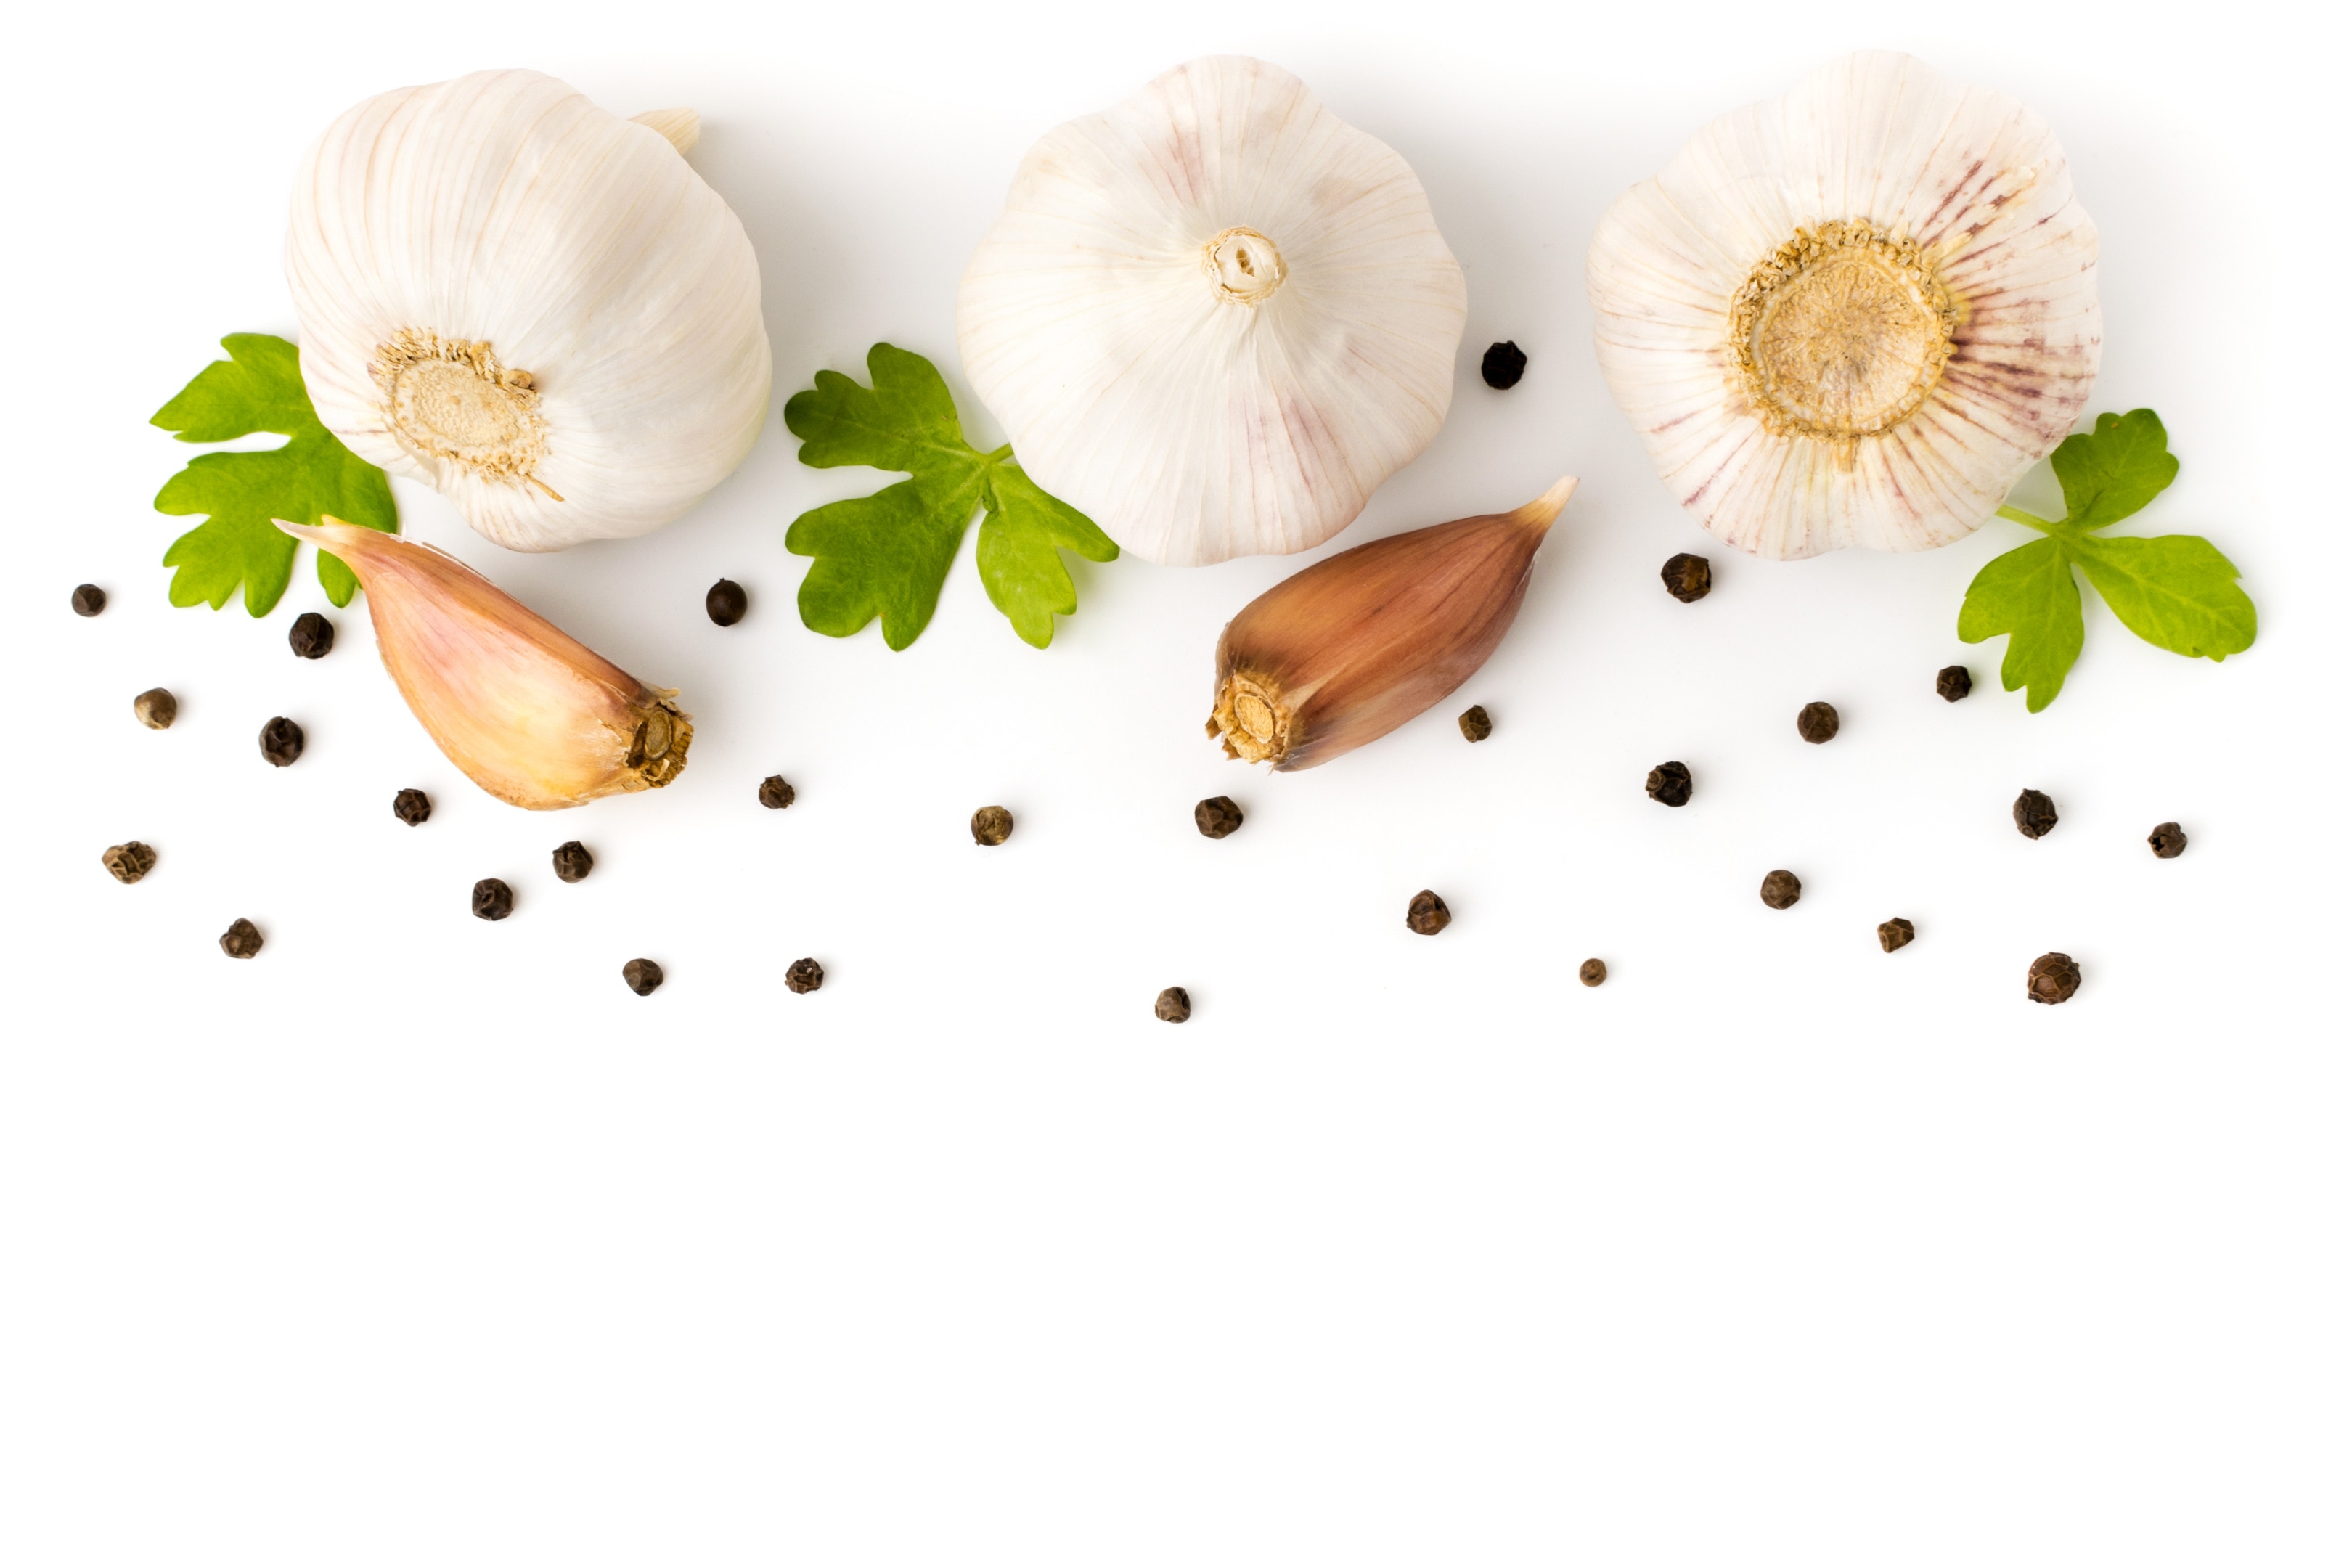 Garlic with parsley leaves and black pepper on white background